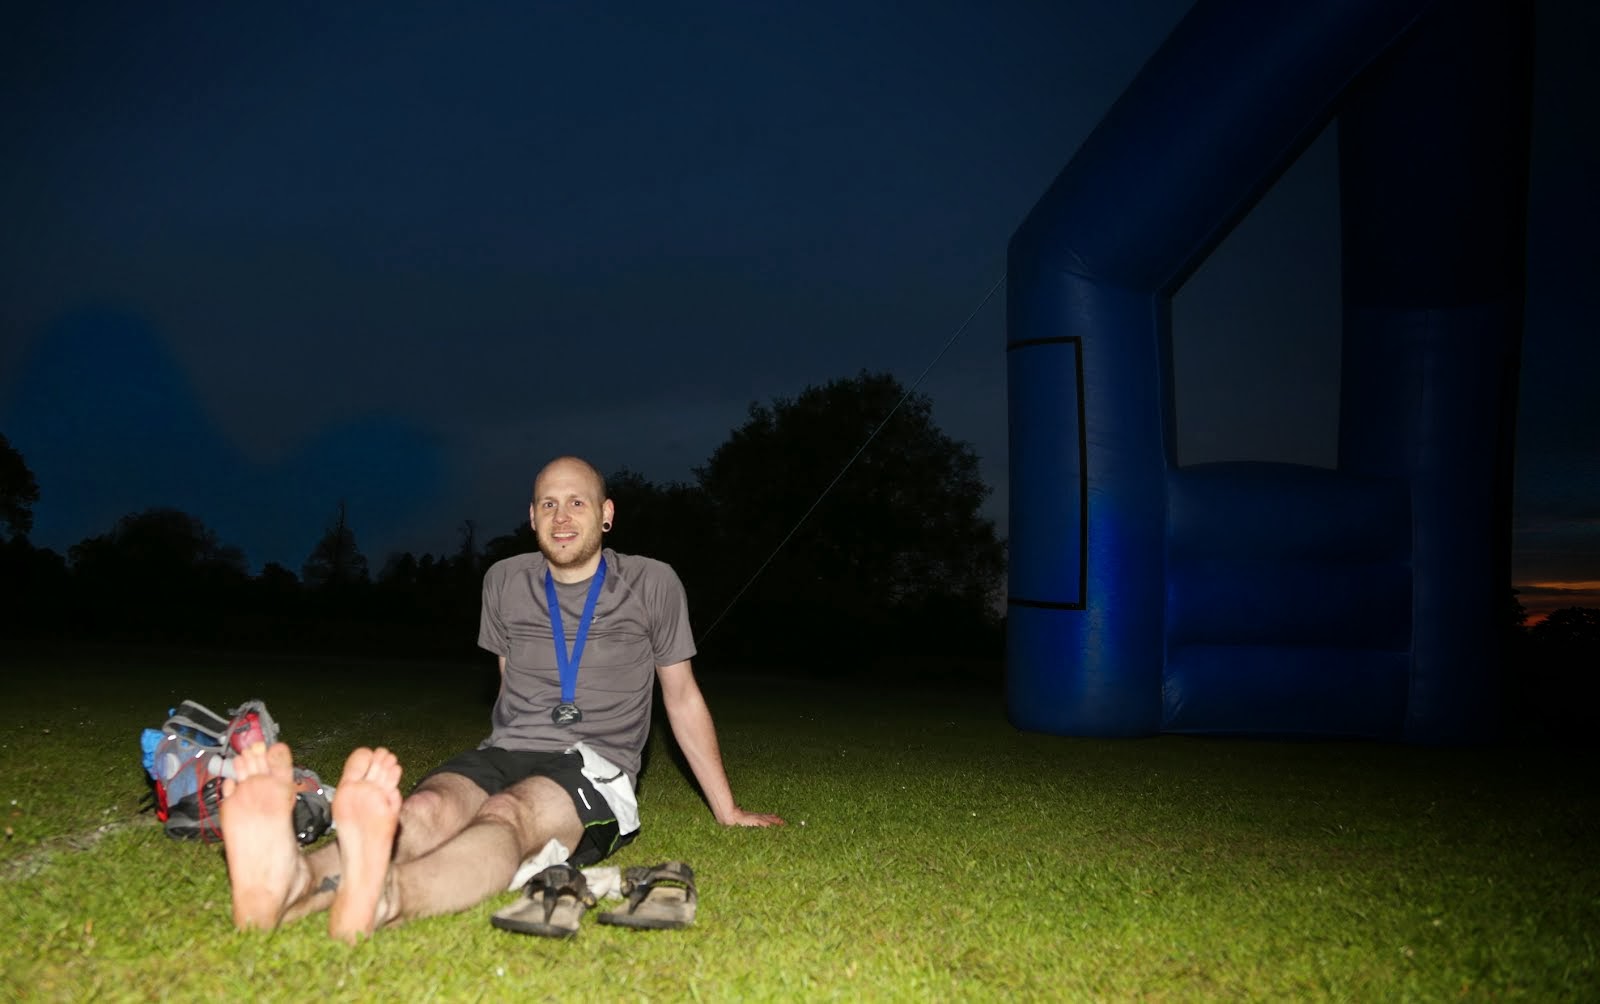 At the finish of the NDW50